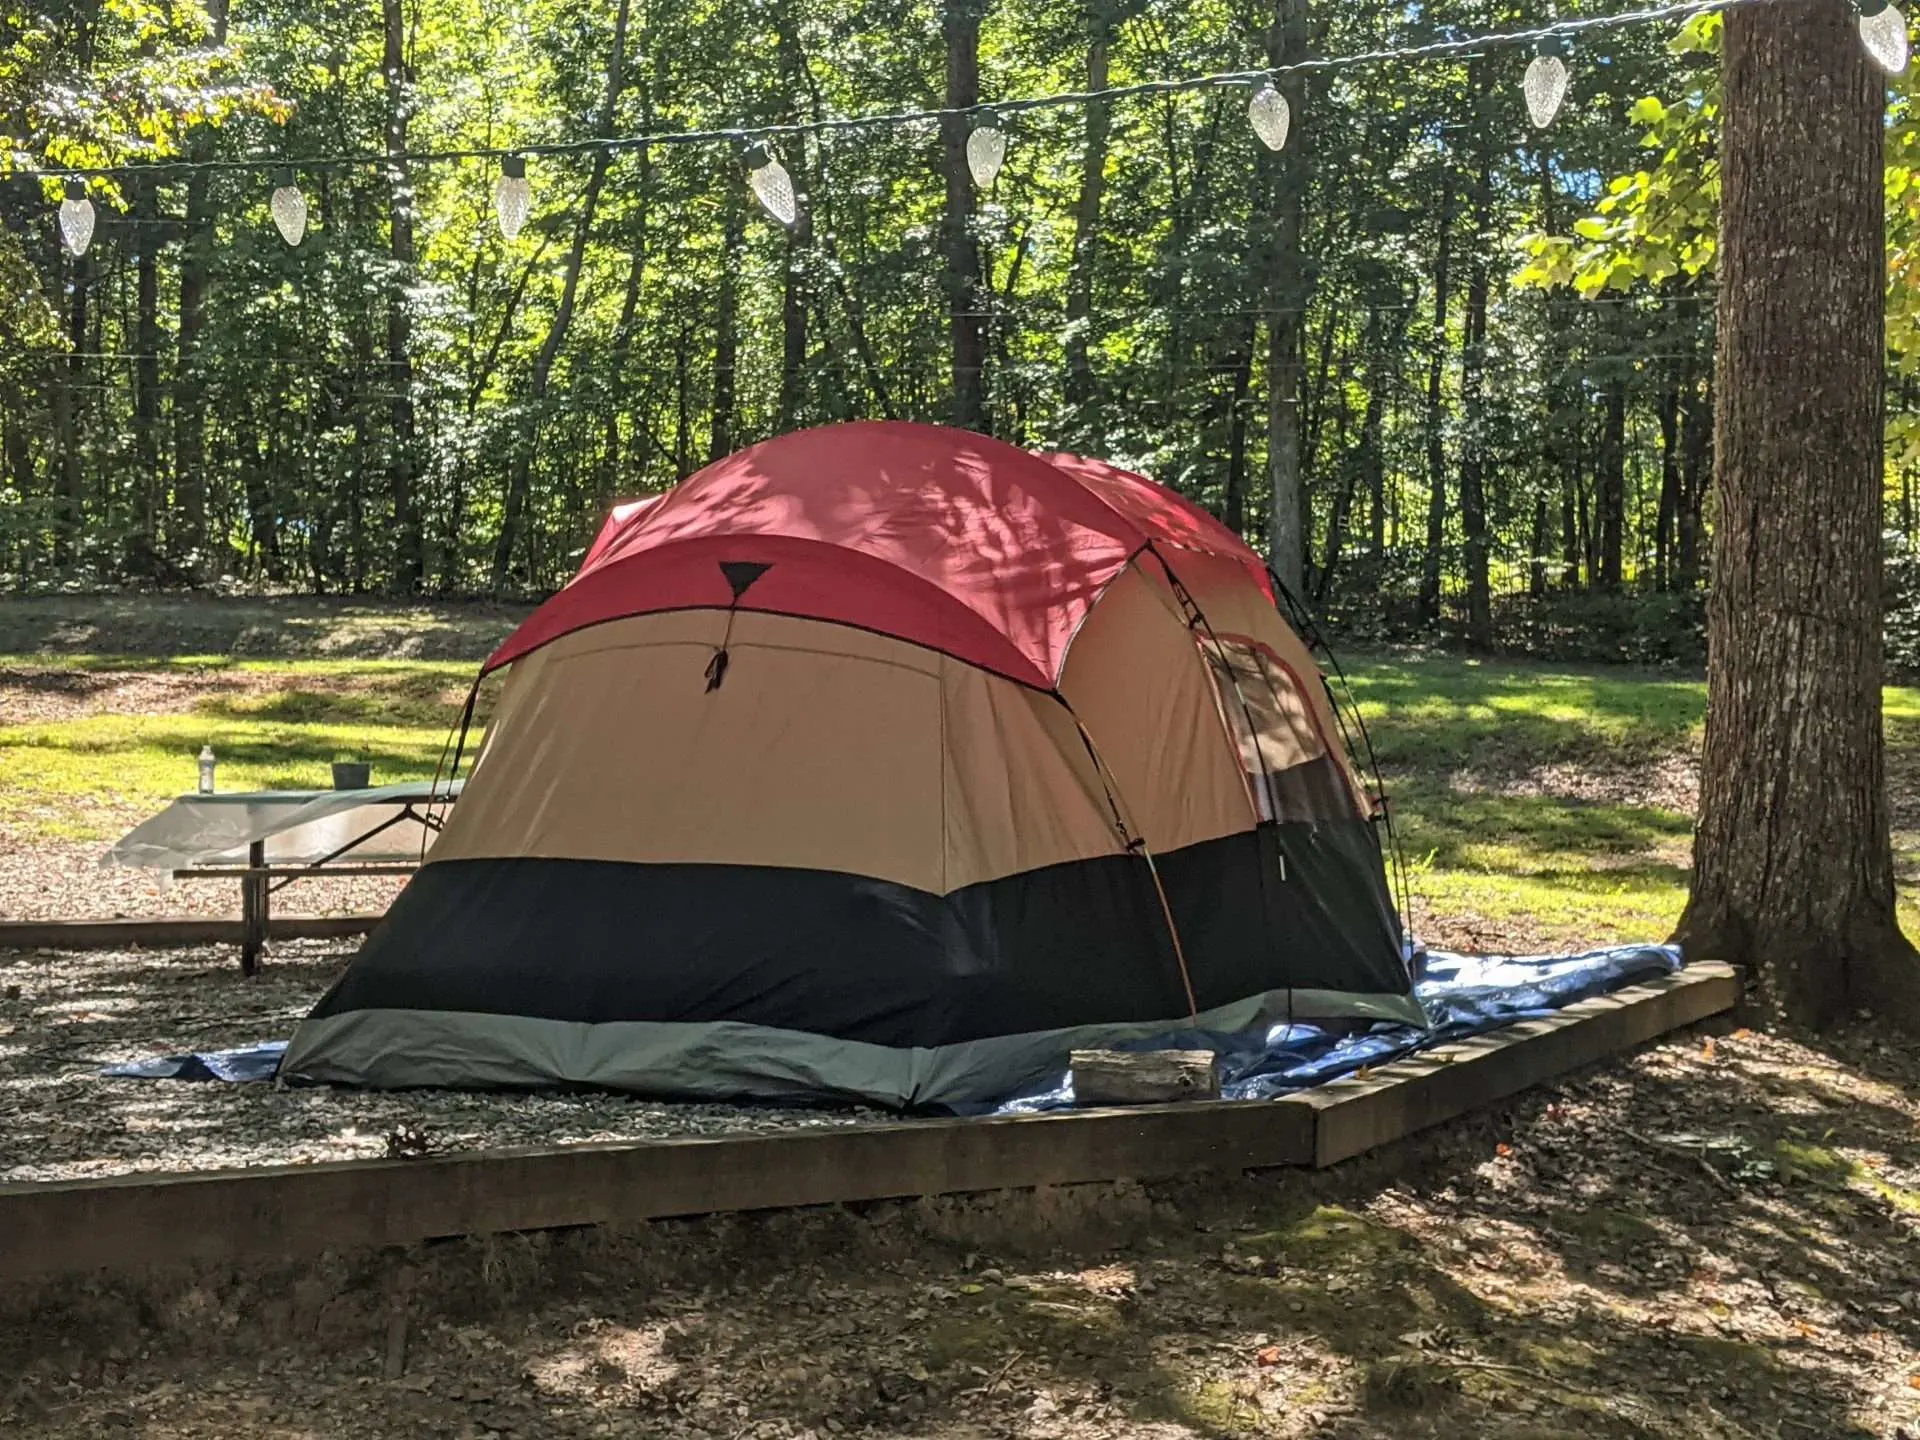 Tent pitched at campsite